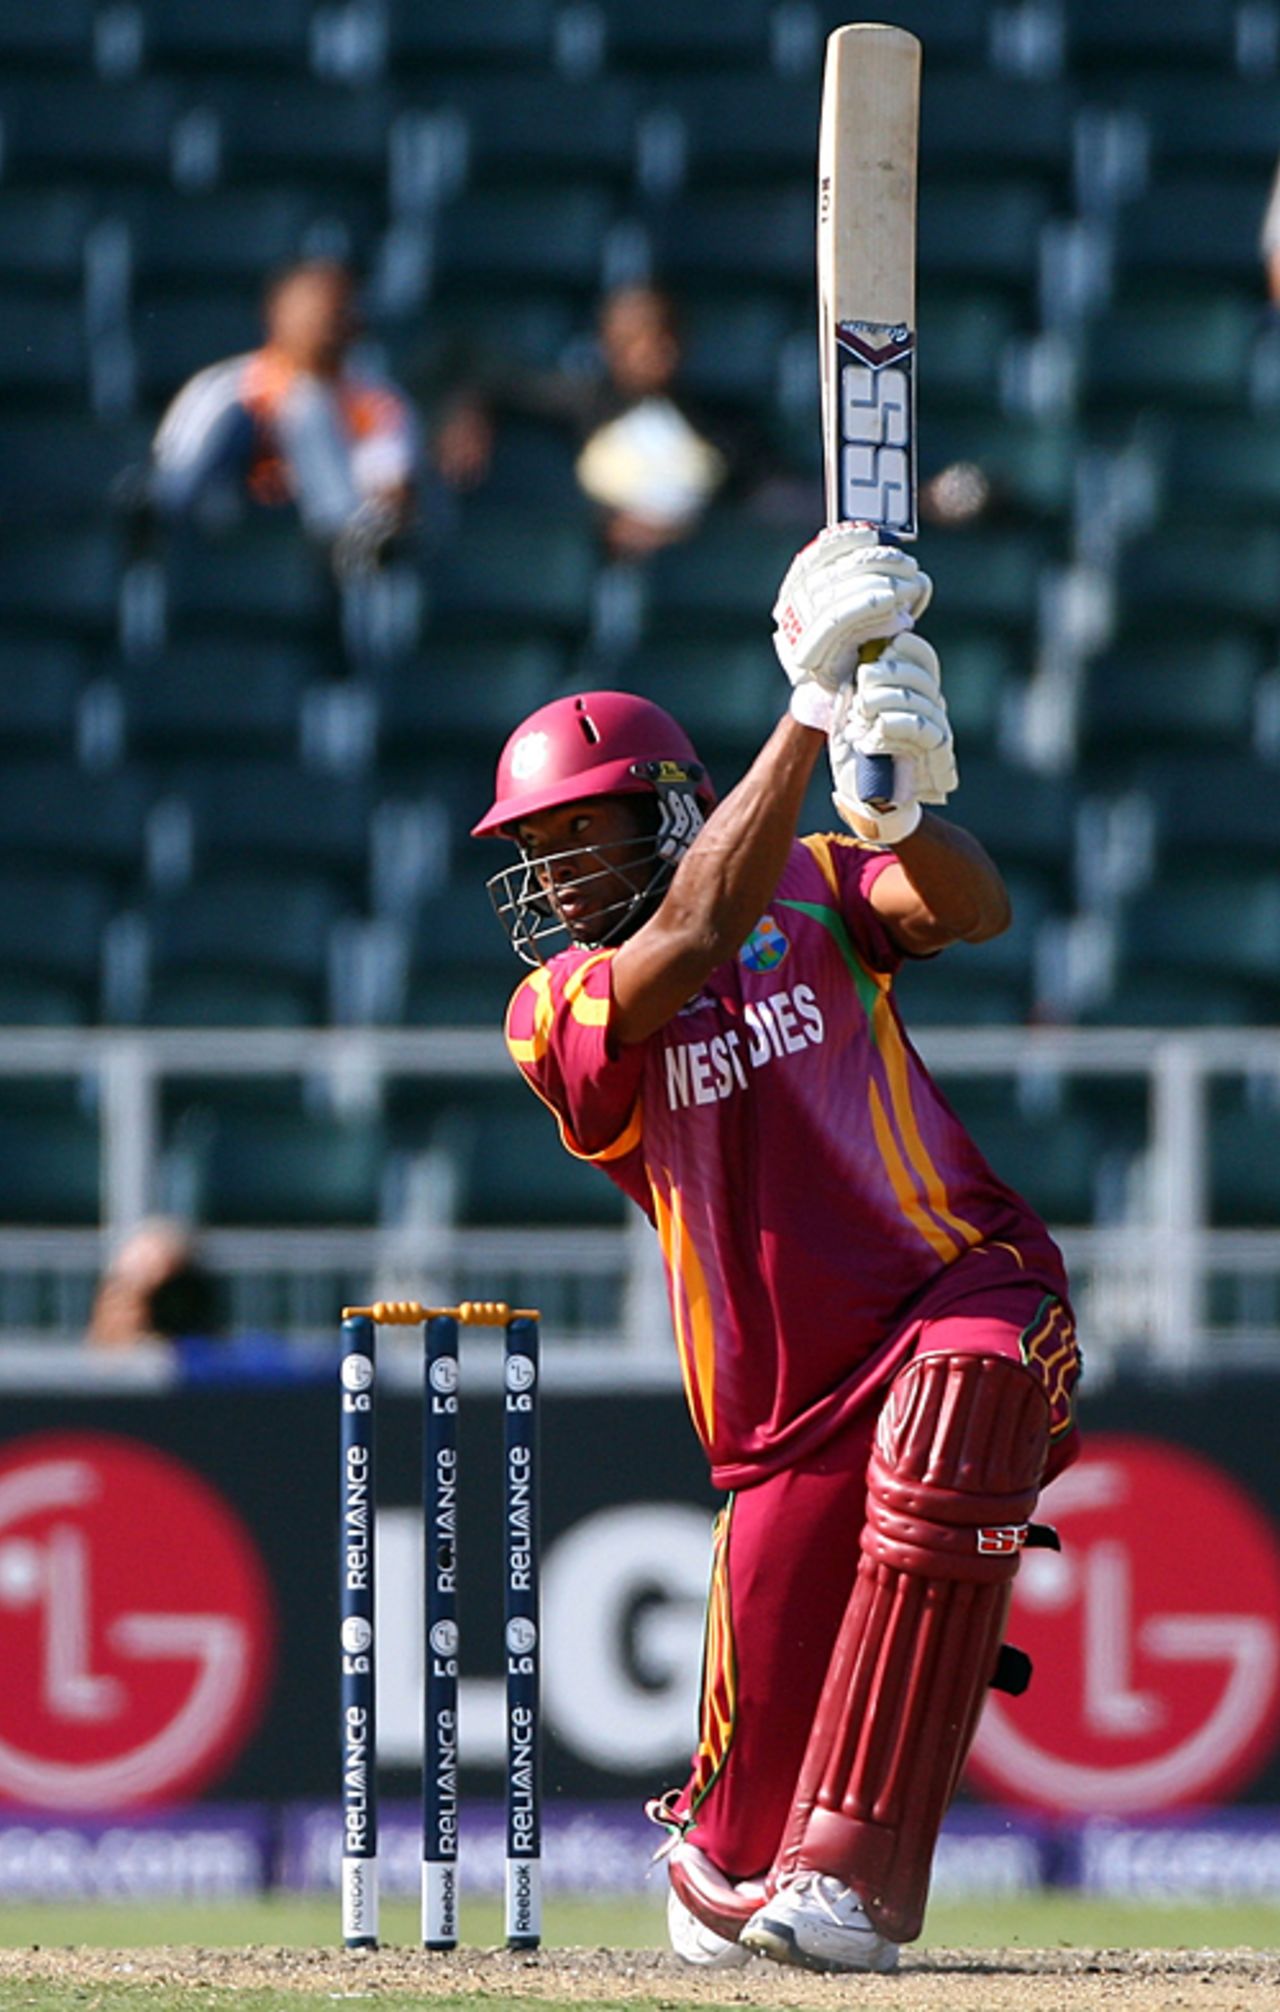 David Bernard frees his arms, India v West Indies, Champions Trophy, Group A, Johannesburg, September 30, 2009